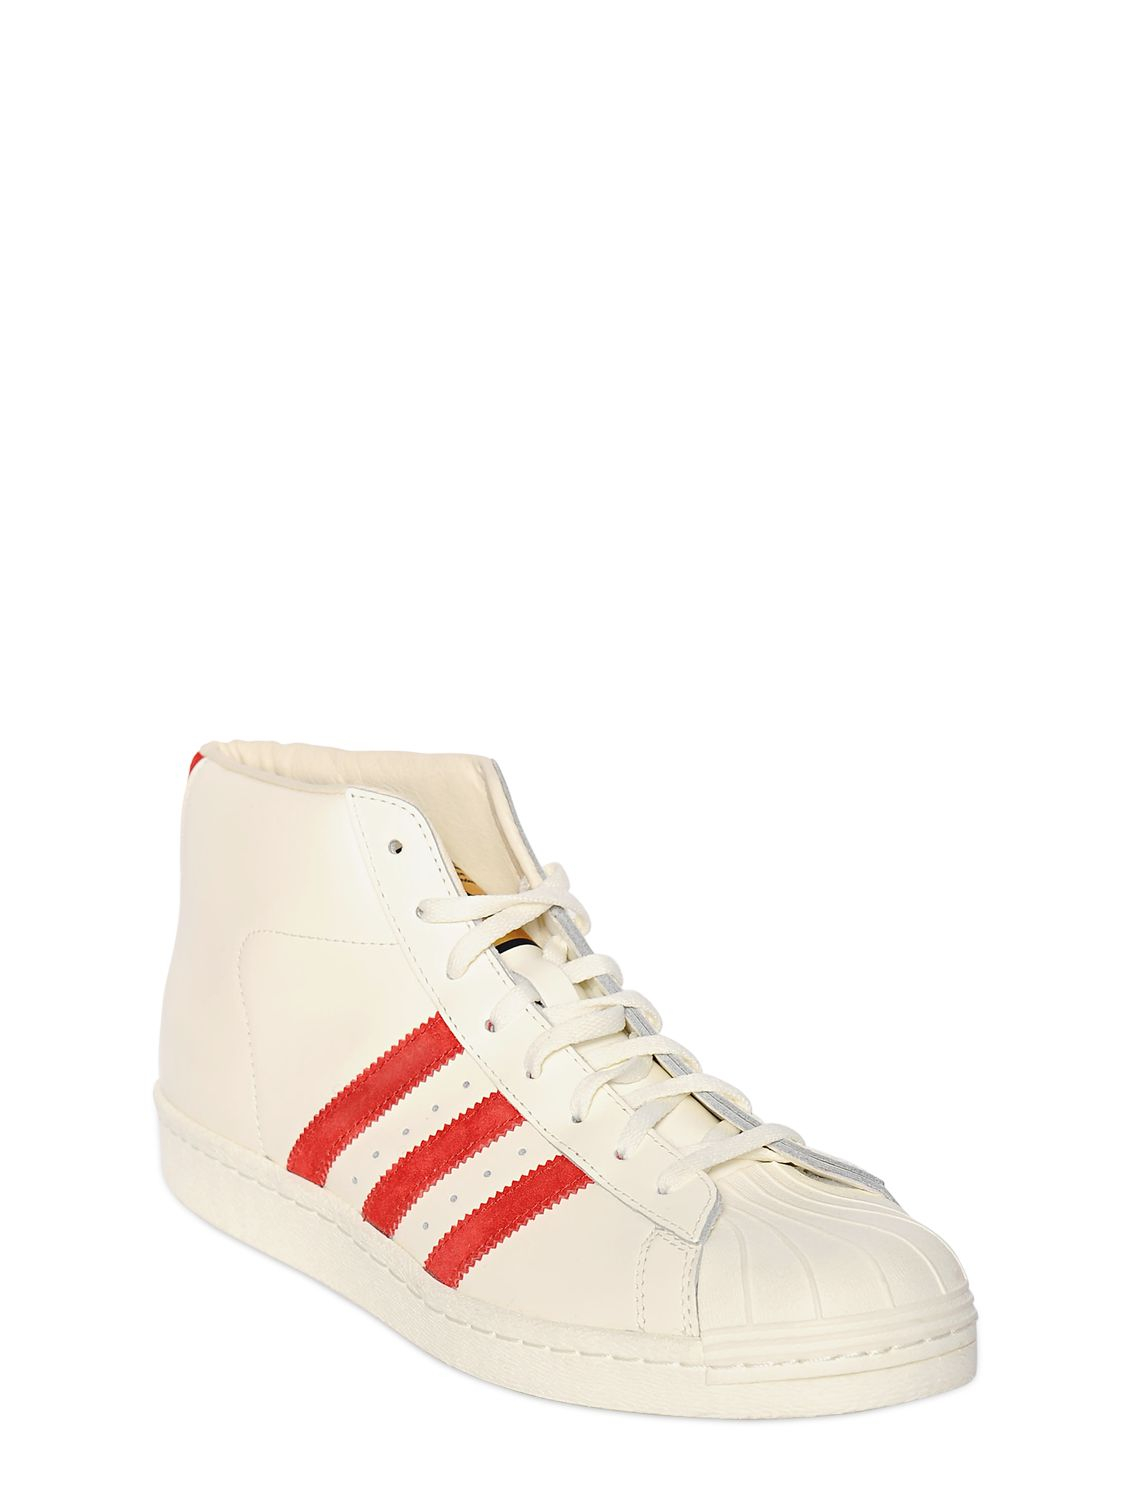 adidas Originals Pro Model Vintage Mid Leather Sneakers in White/Red  (White) for Men - Lyst